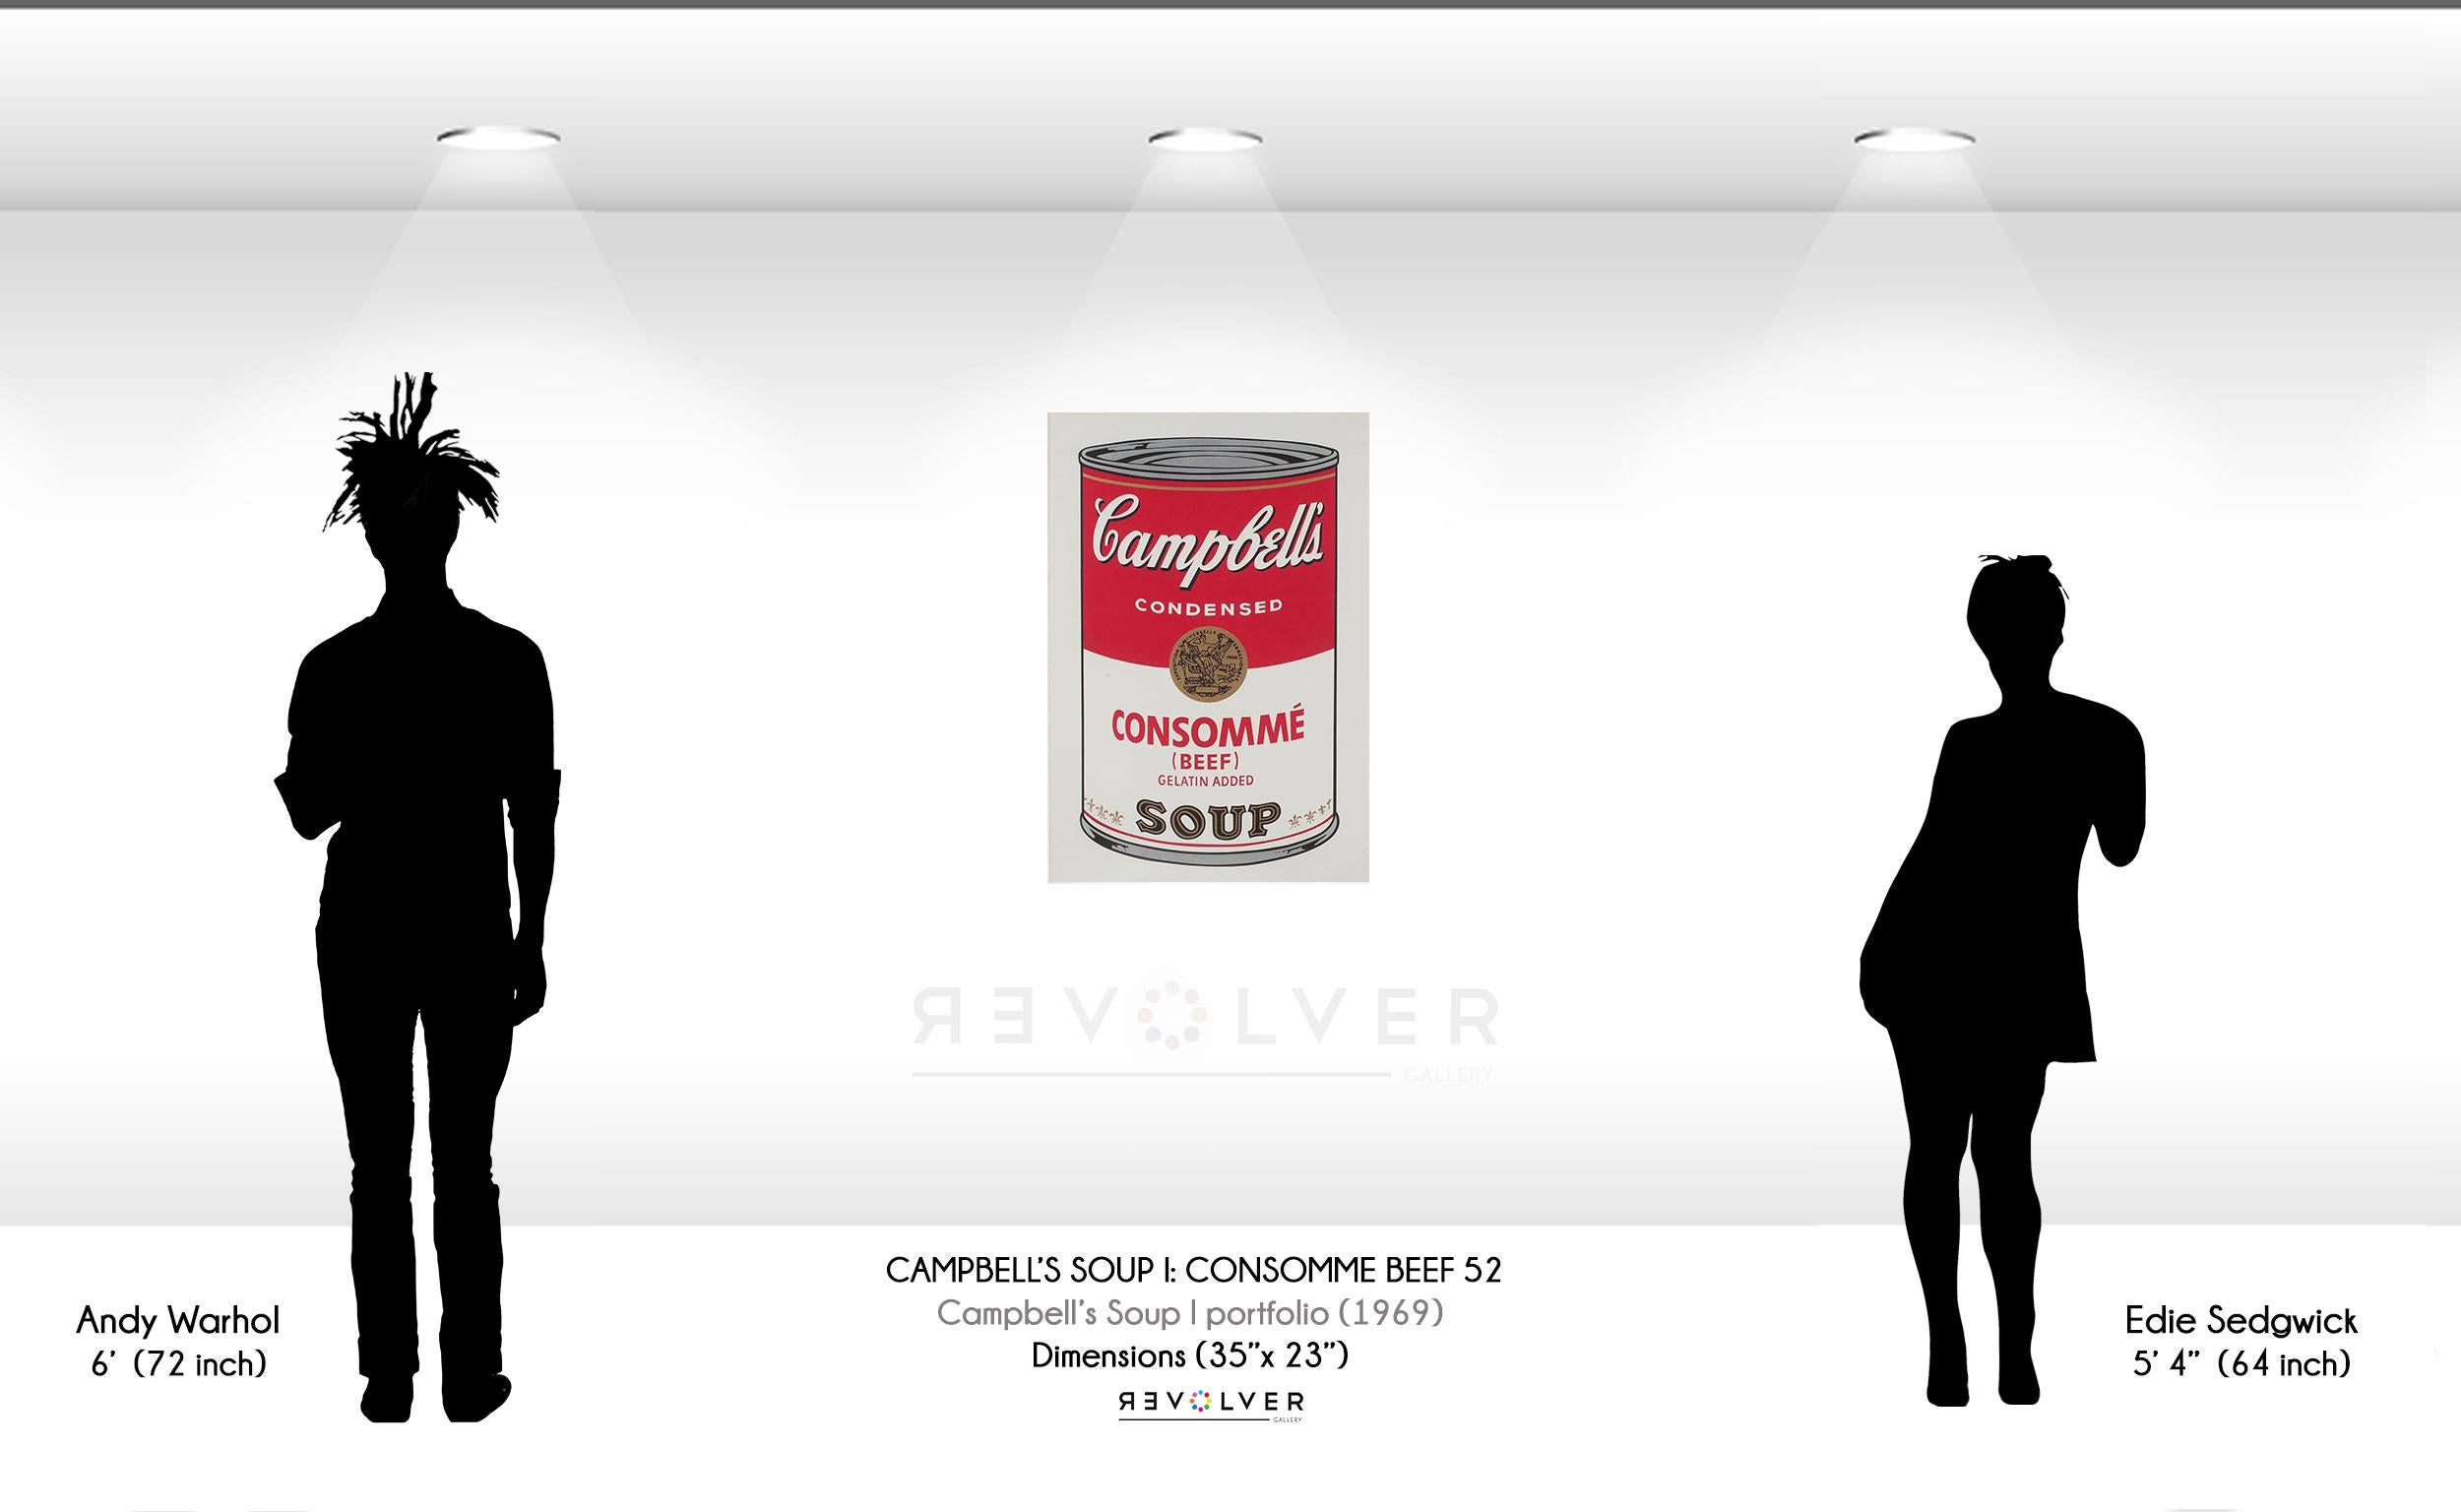 CAMPBELL’S SOUP I: CONSOMMÉ 52

Campbell’s Soup I: Consommé 52 is part of Warhol’s first Campbell’s Soup portfolios, Campbell’s Soup I. One of the reasons that Andy Warhol chose to feature Campbell’s soup was because of his fascination with consumer